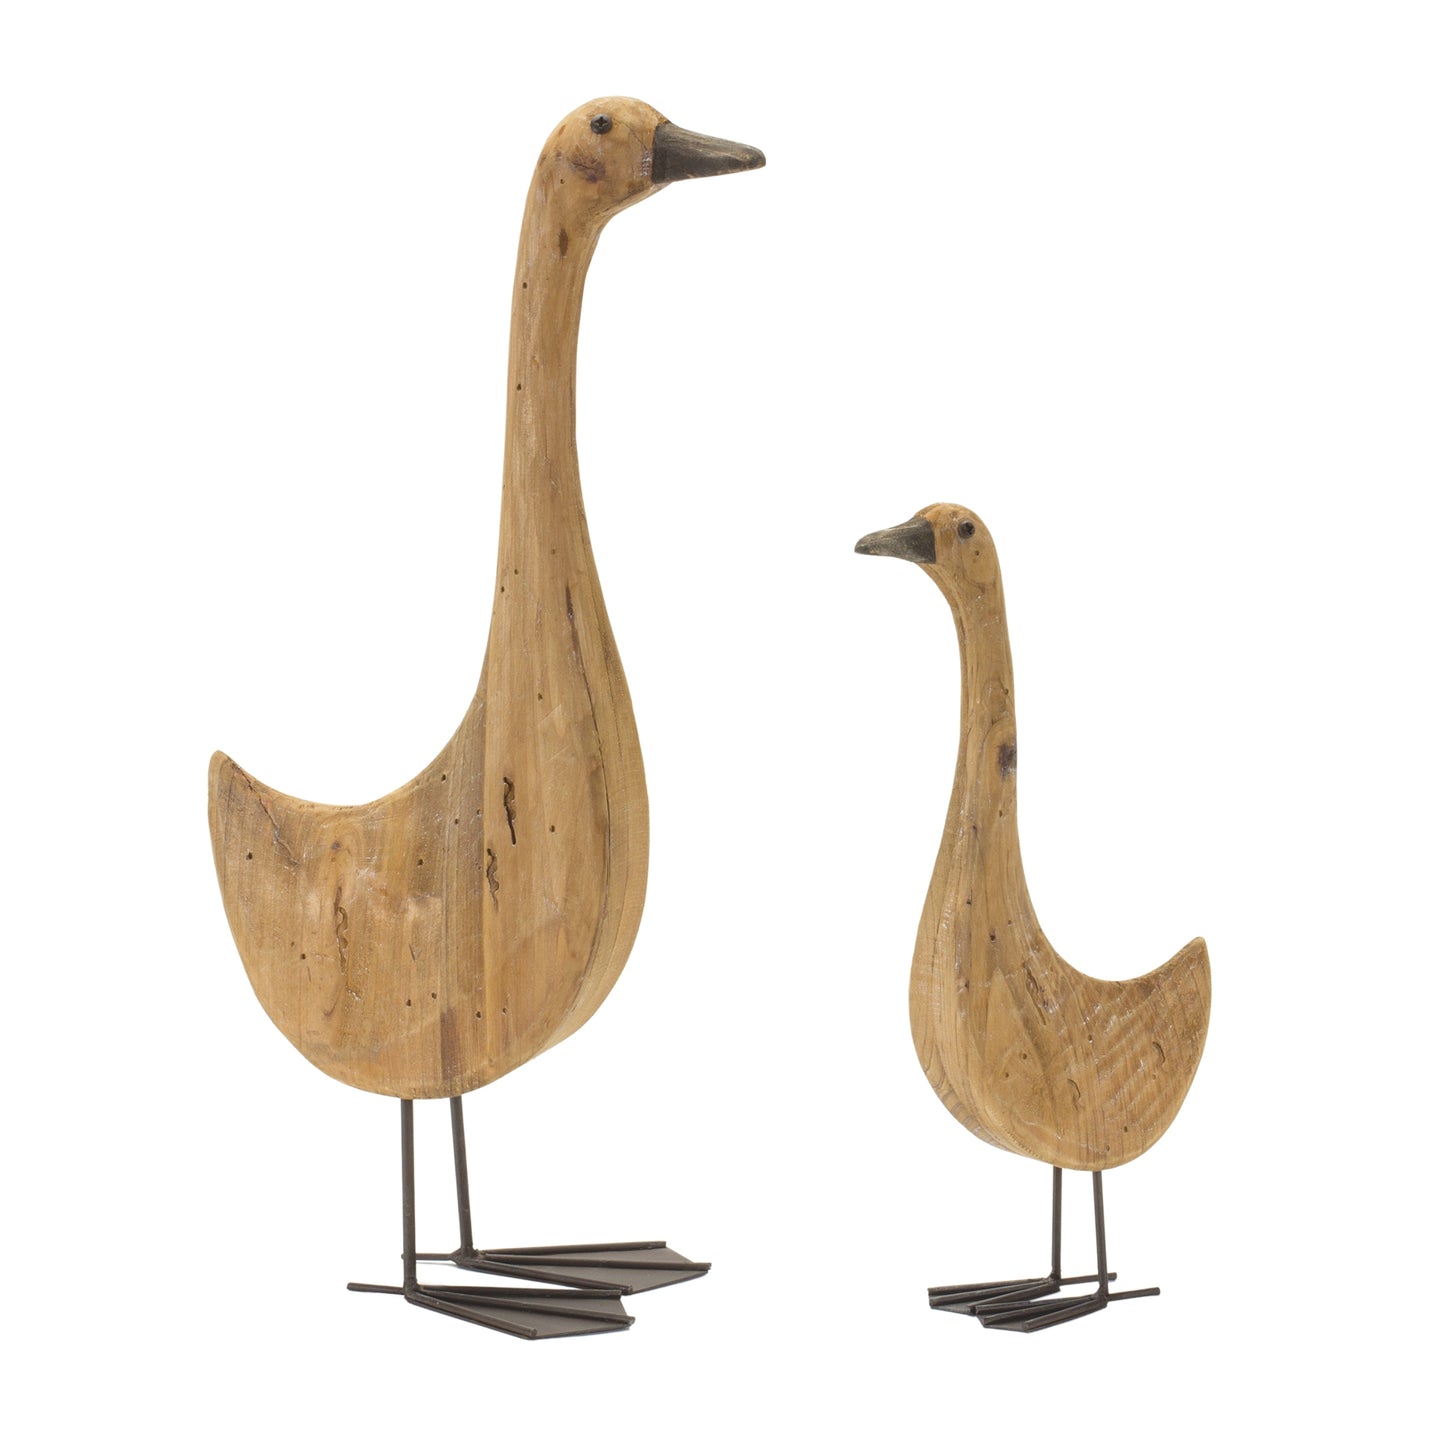 Natural Fir Wood Goose Figurine with Rustic Metal Accents (Set of 2)